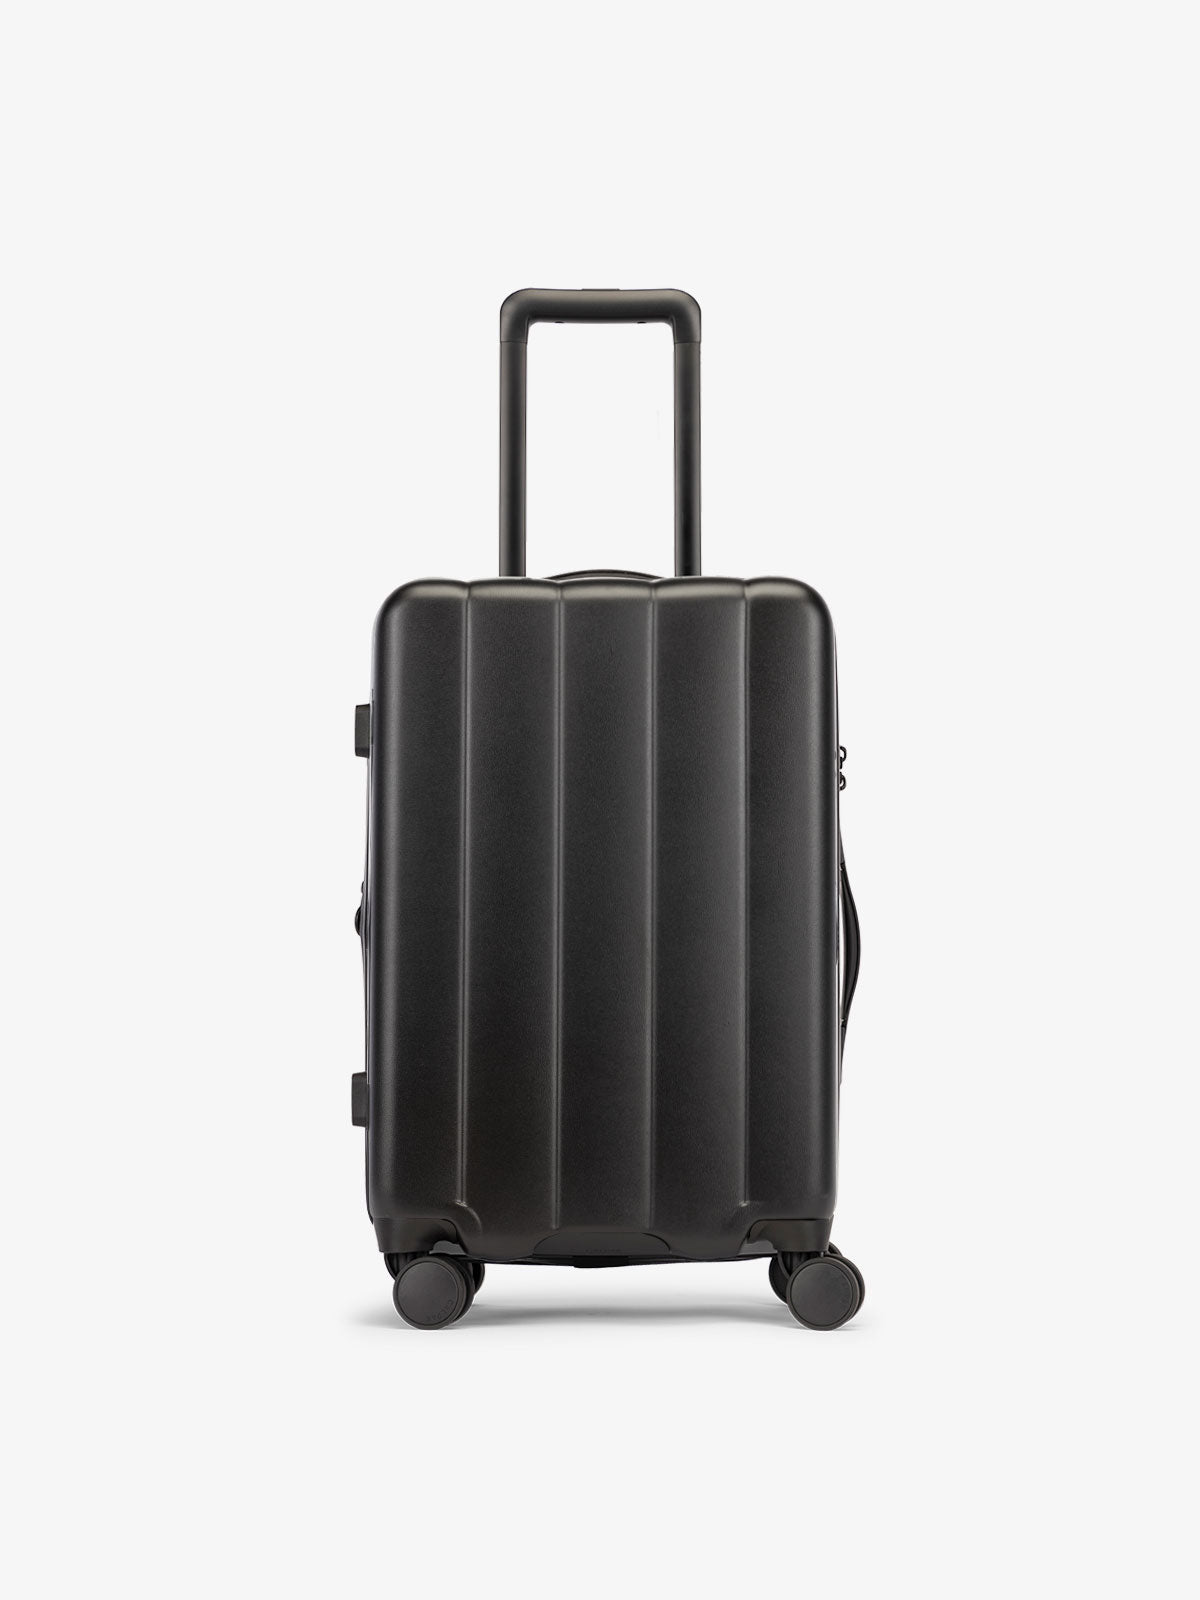 Evry Carry-On Luggage in Black / 21 | CALPAK